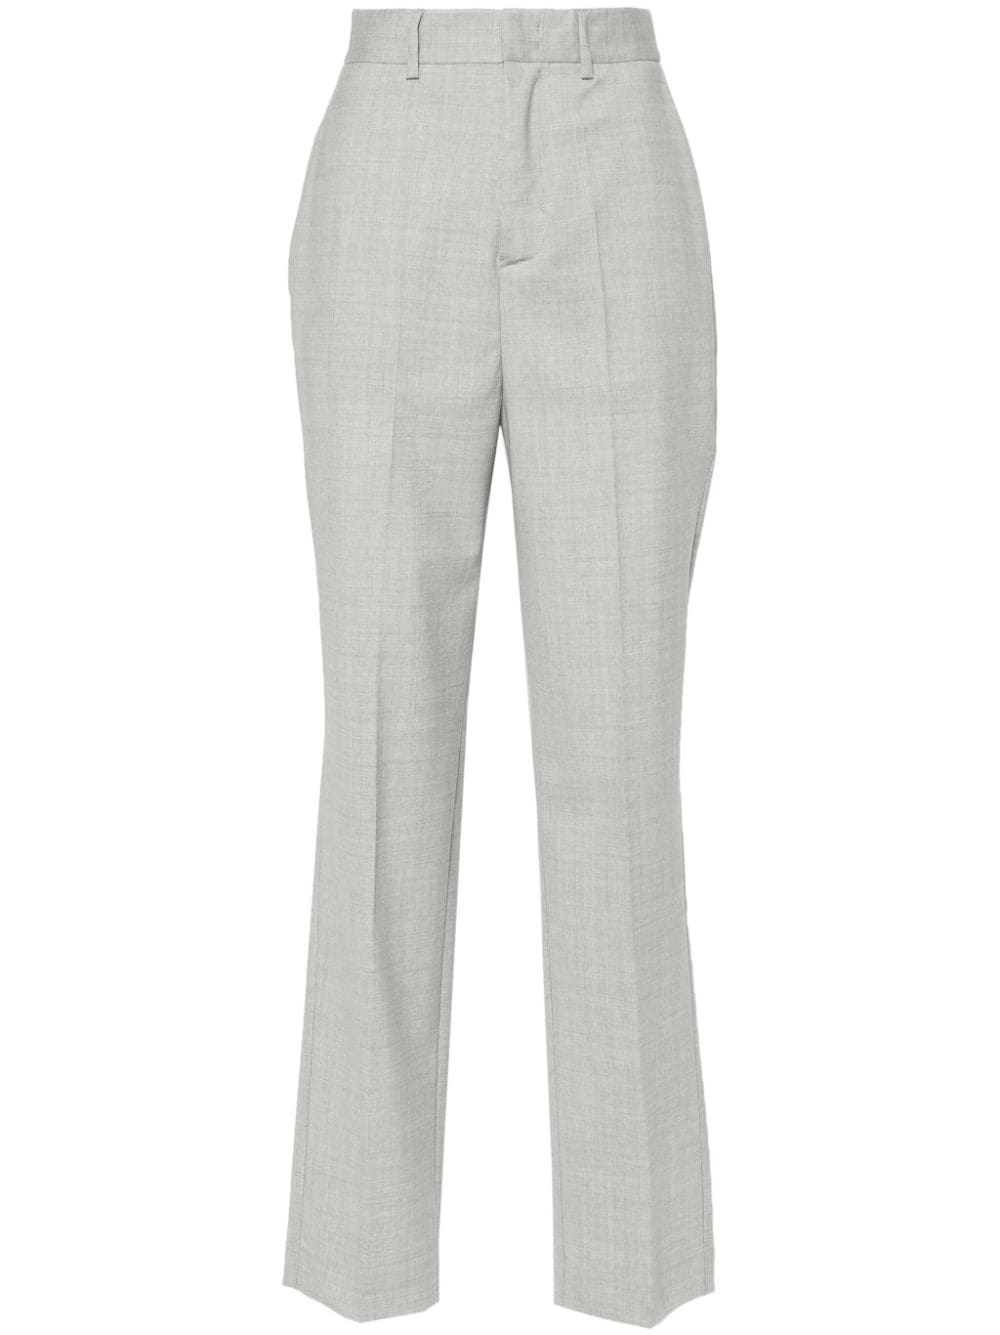 P.A.R.O.S.H. high-waisted tailored trousers - Grey von P.A.R.O.S.H.